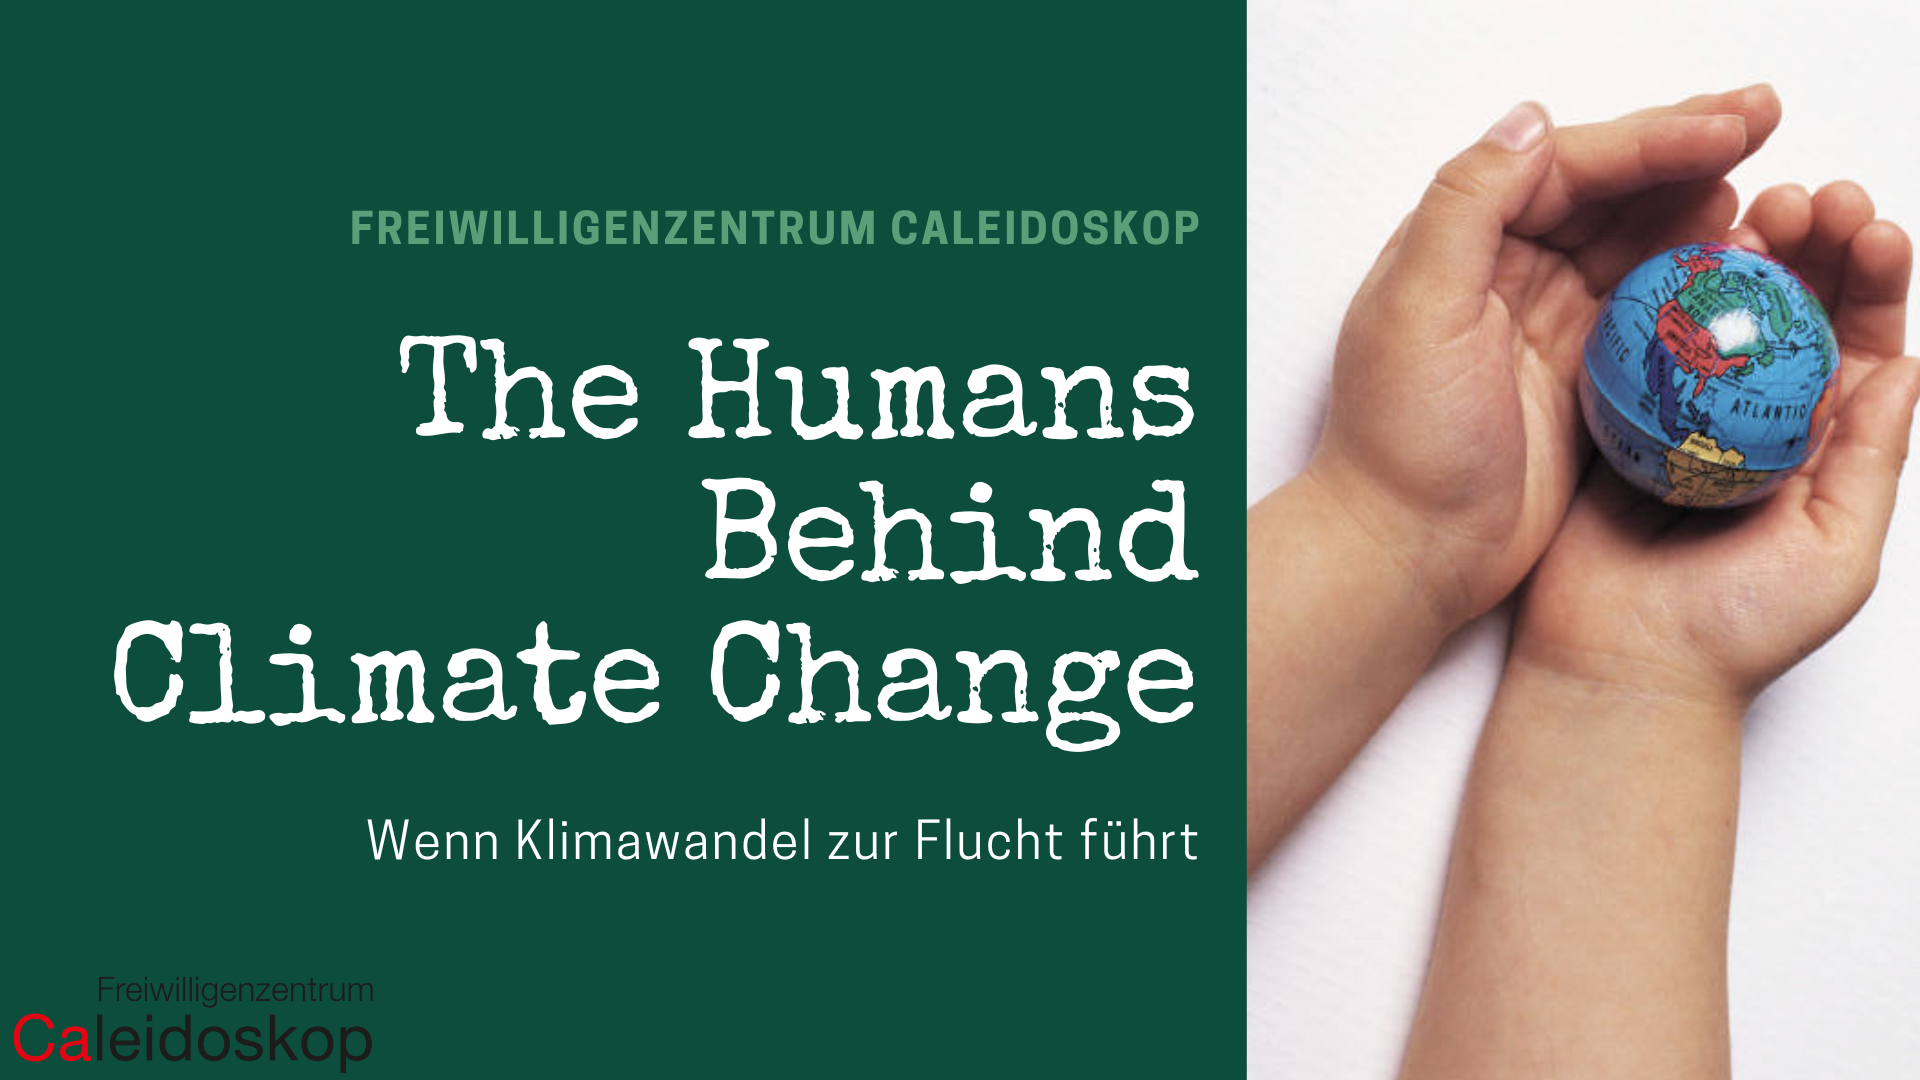 "The humans behind climate change: when climate change leads to flight".